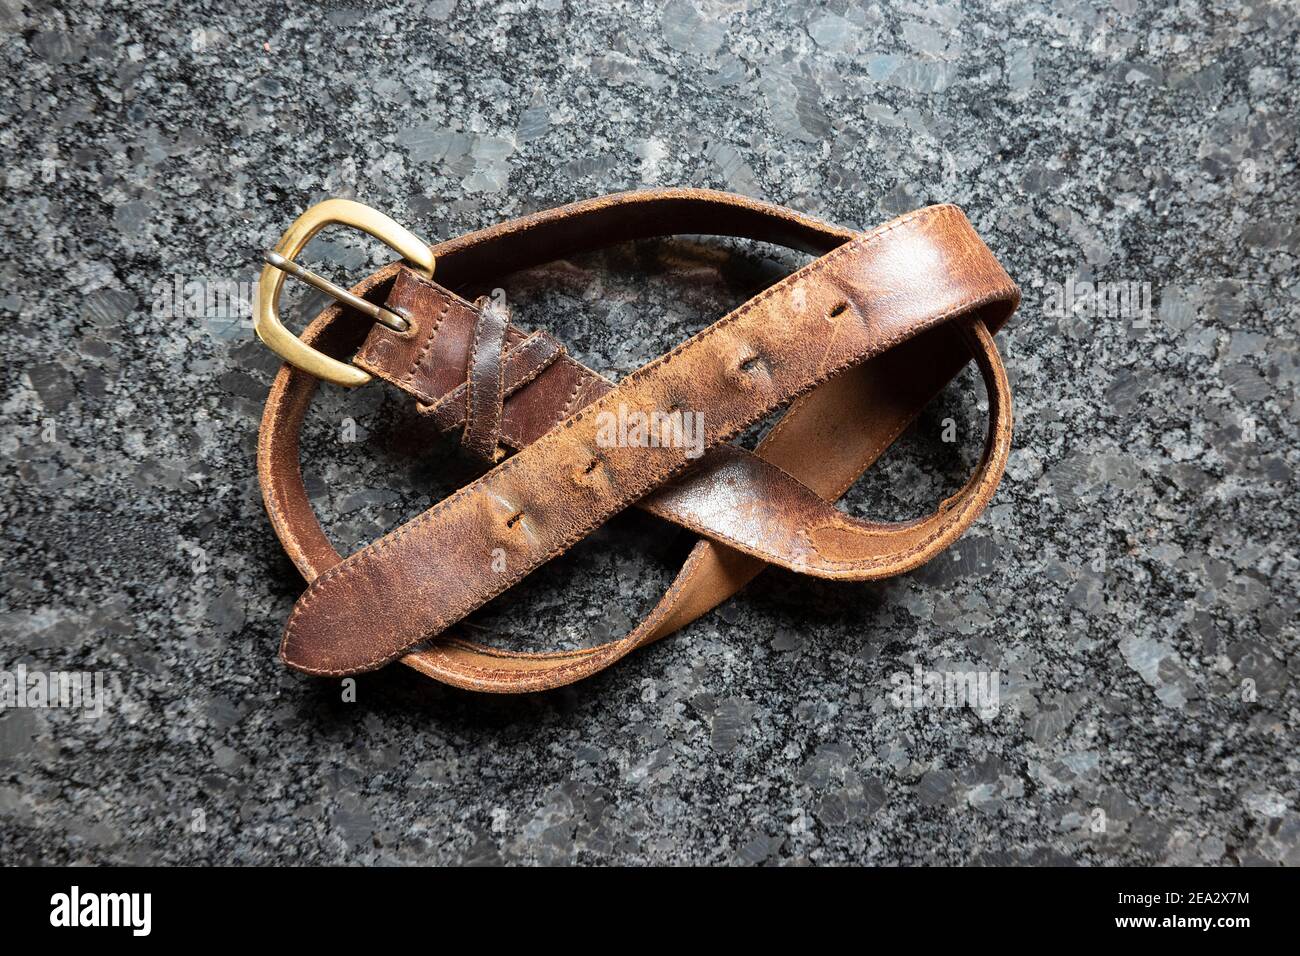 old-mens-leather-belt-with-worn-notches-2EA2X7M.jpg